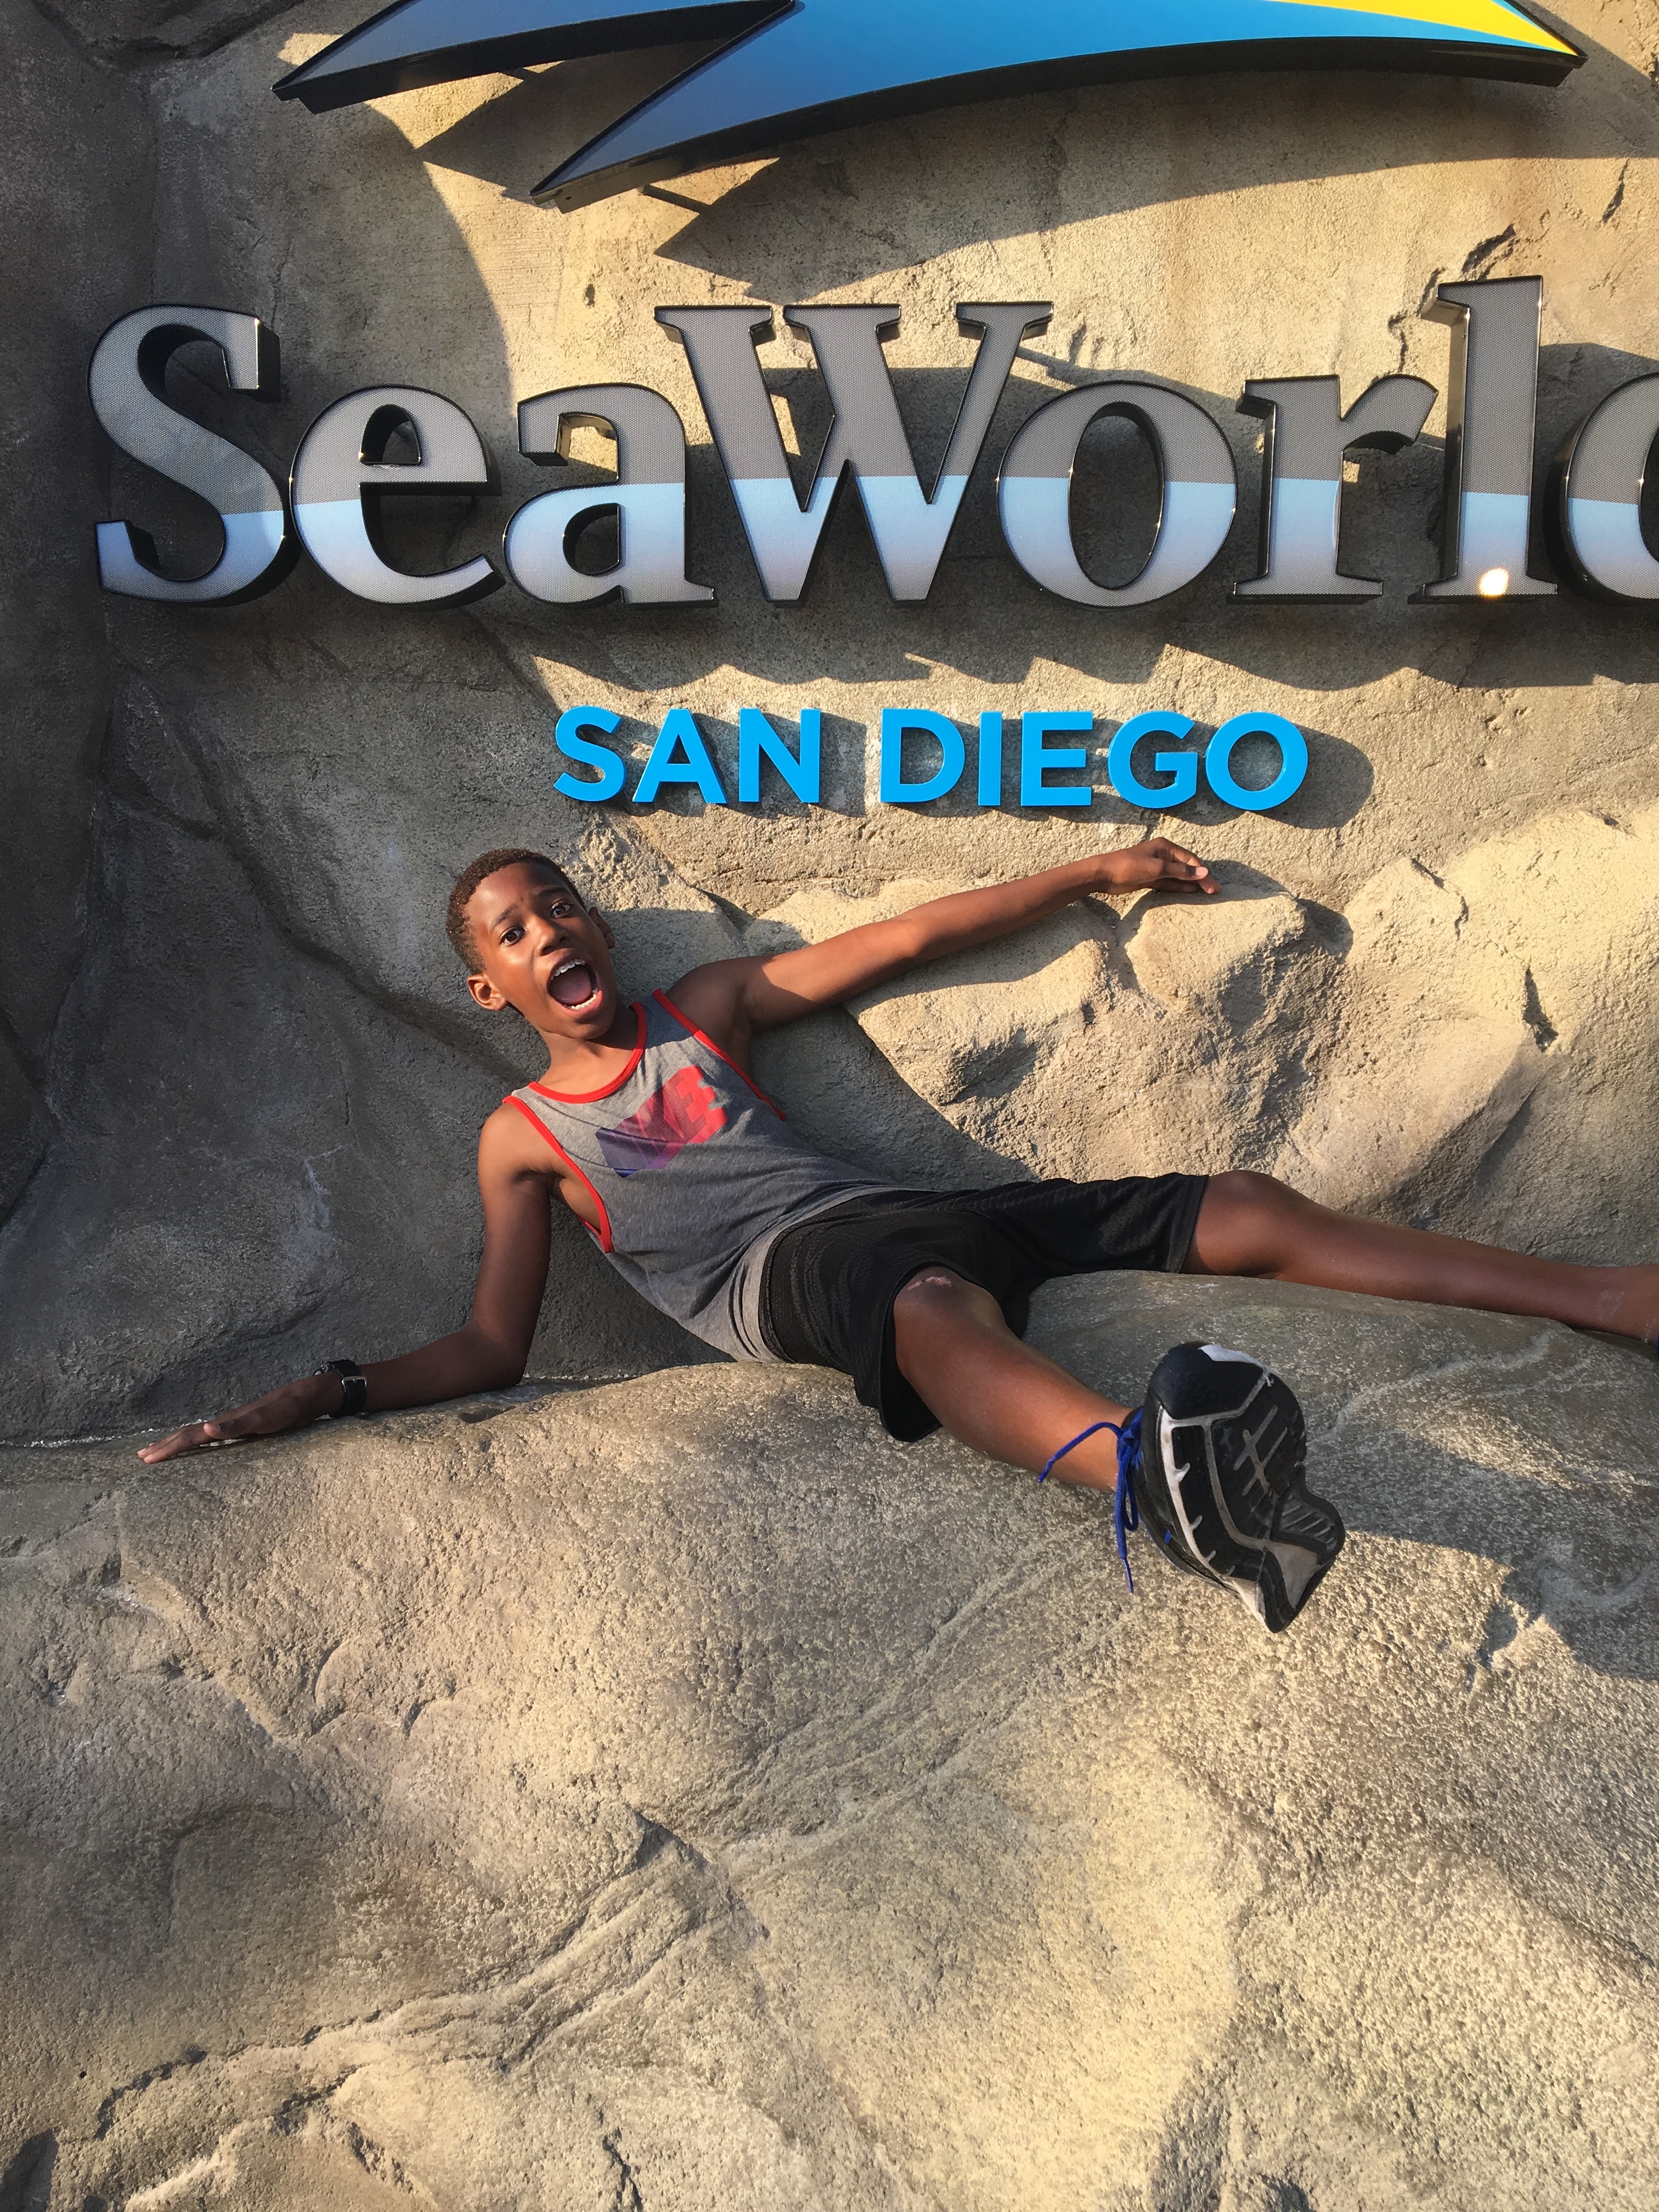 Things To Do In SeaWorld San Diego